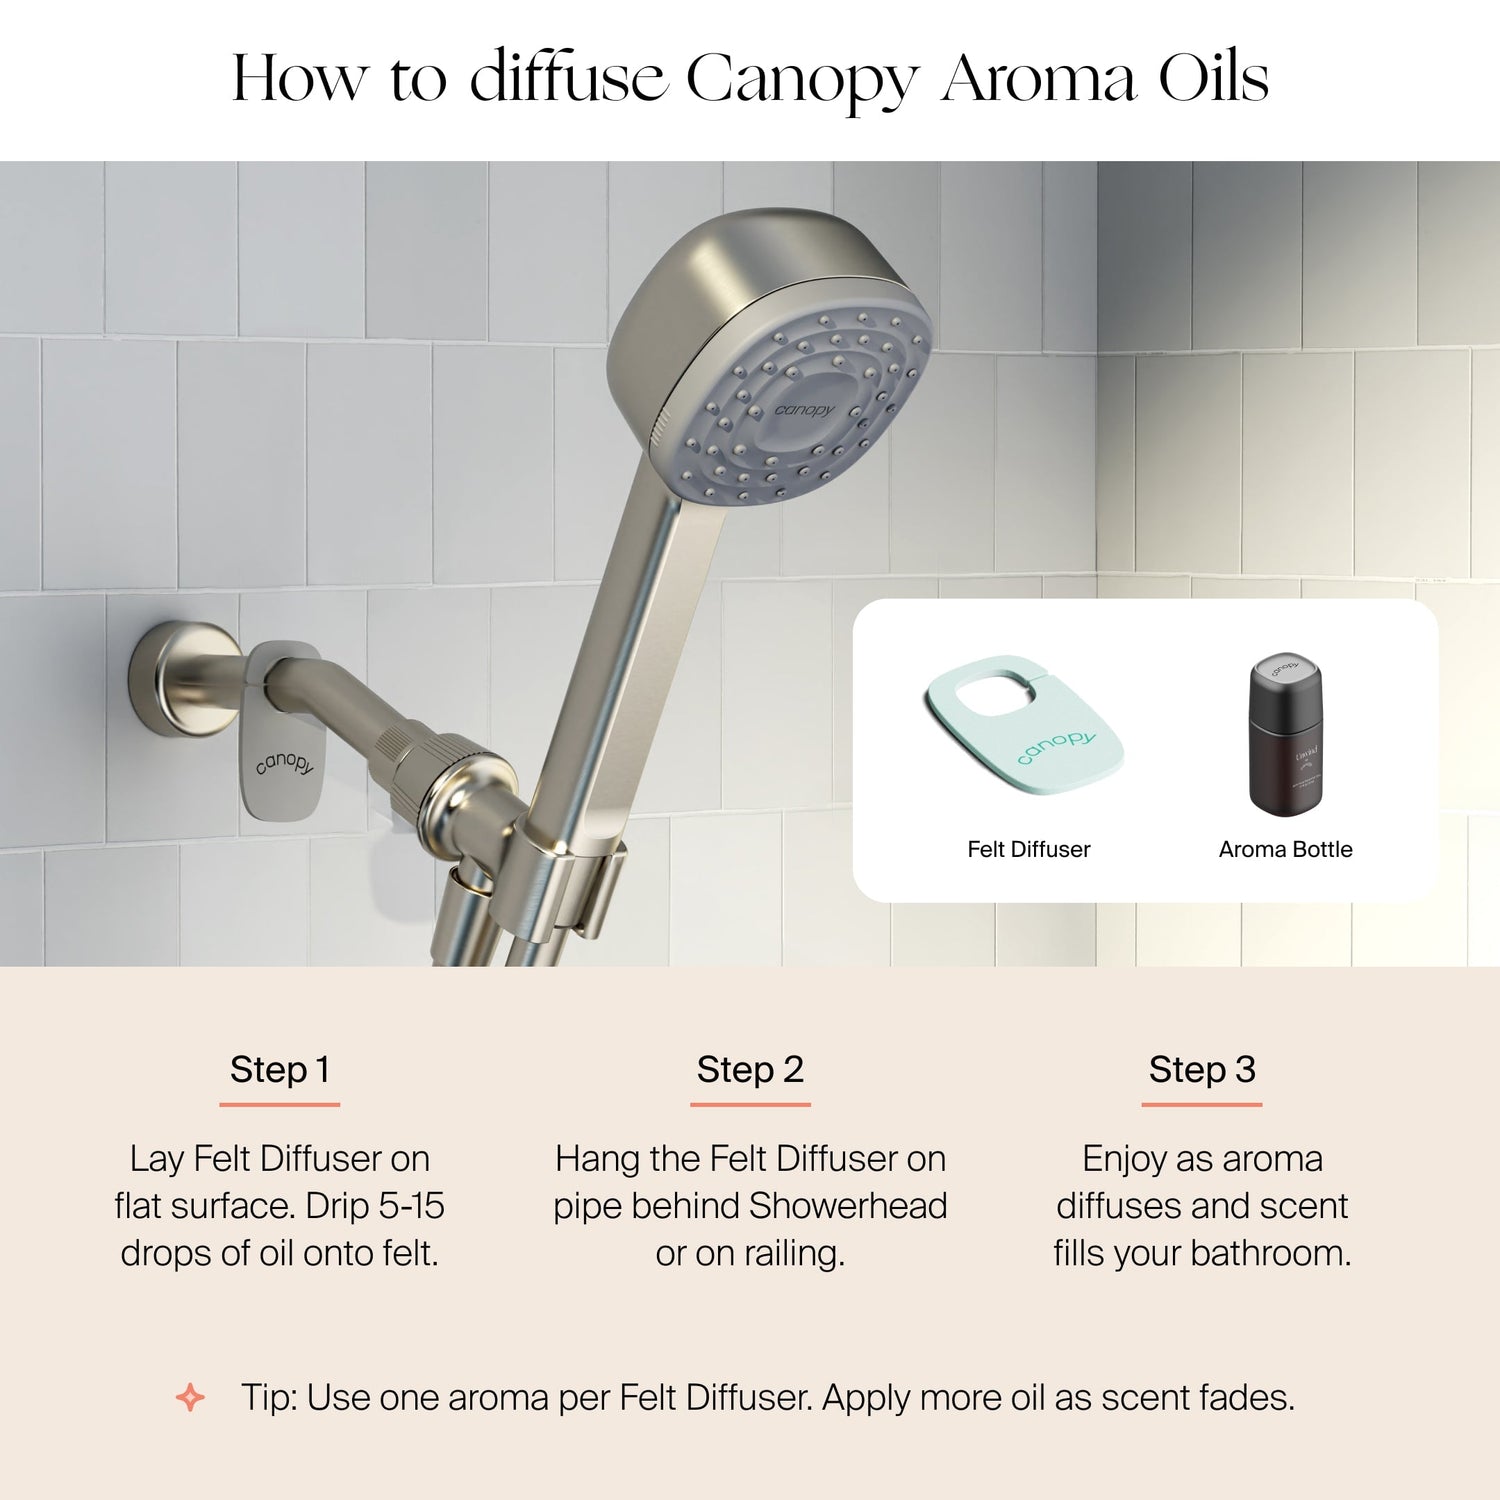 Handheld Filtered Showerhead | Lifestyle,  How to diffuse Canopy Aroma Oils